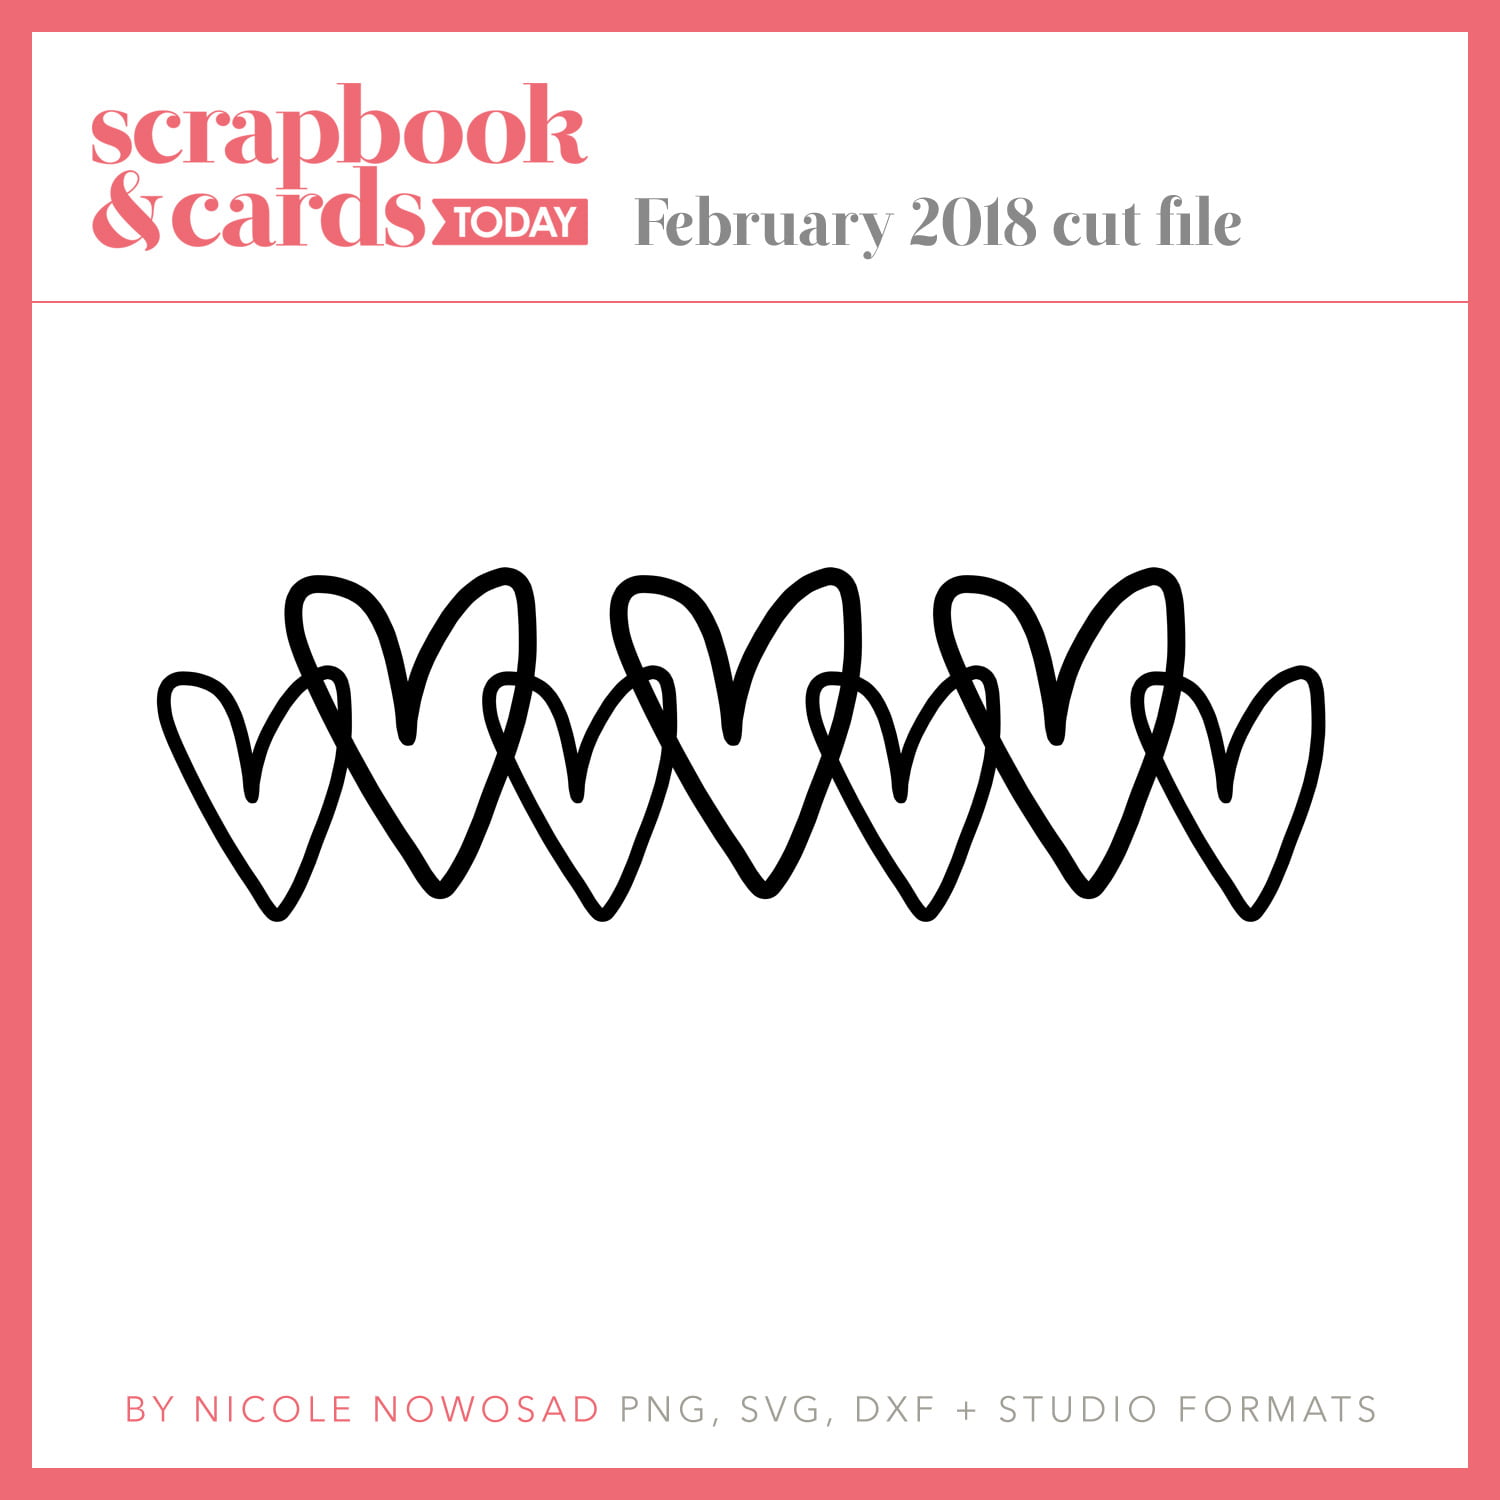 February 2018 free cut file for Scrapbook & Cards Today